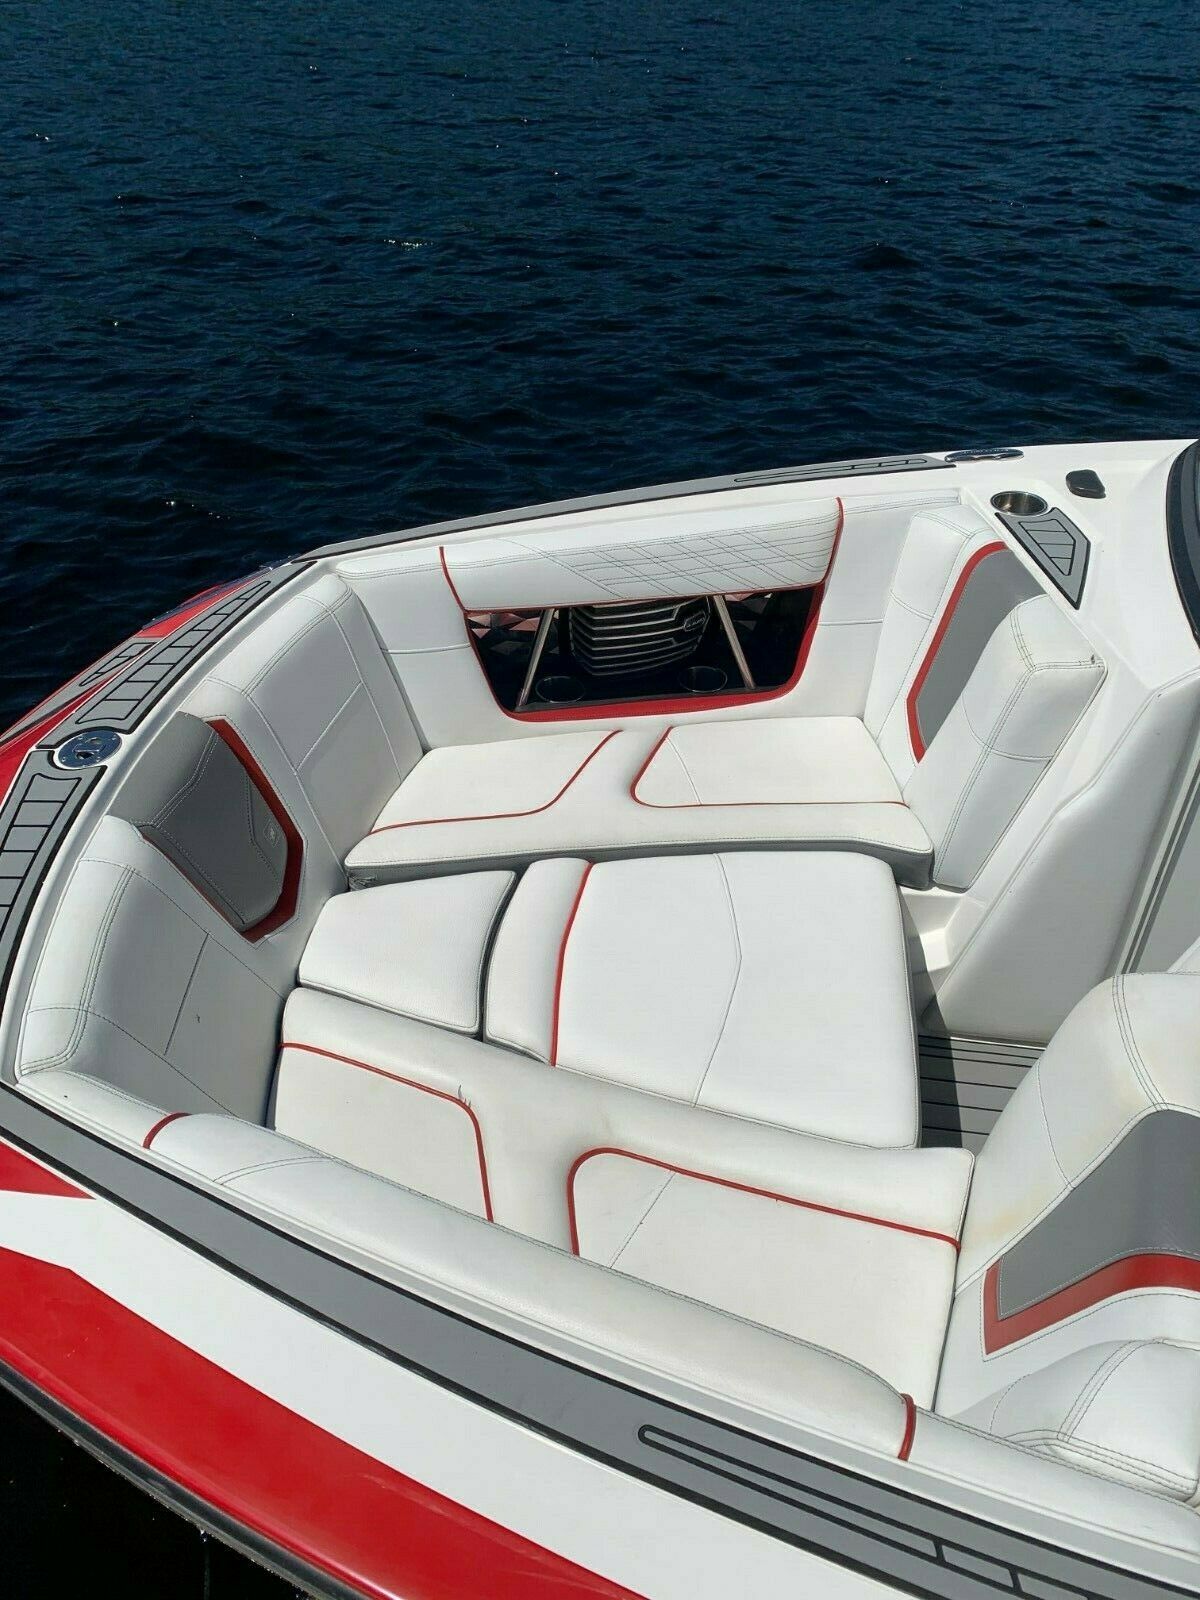 Nautique G21 2016 for sale for $87,999 - Boats-from-USA.com